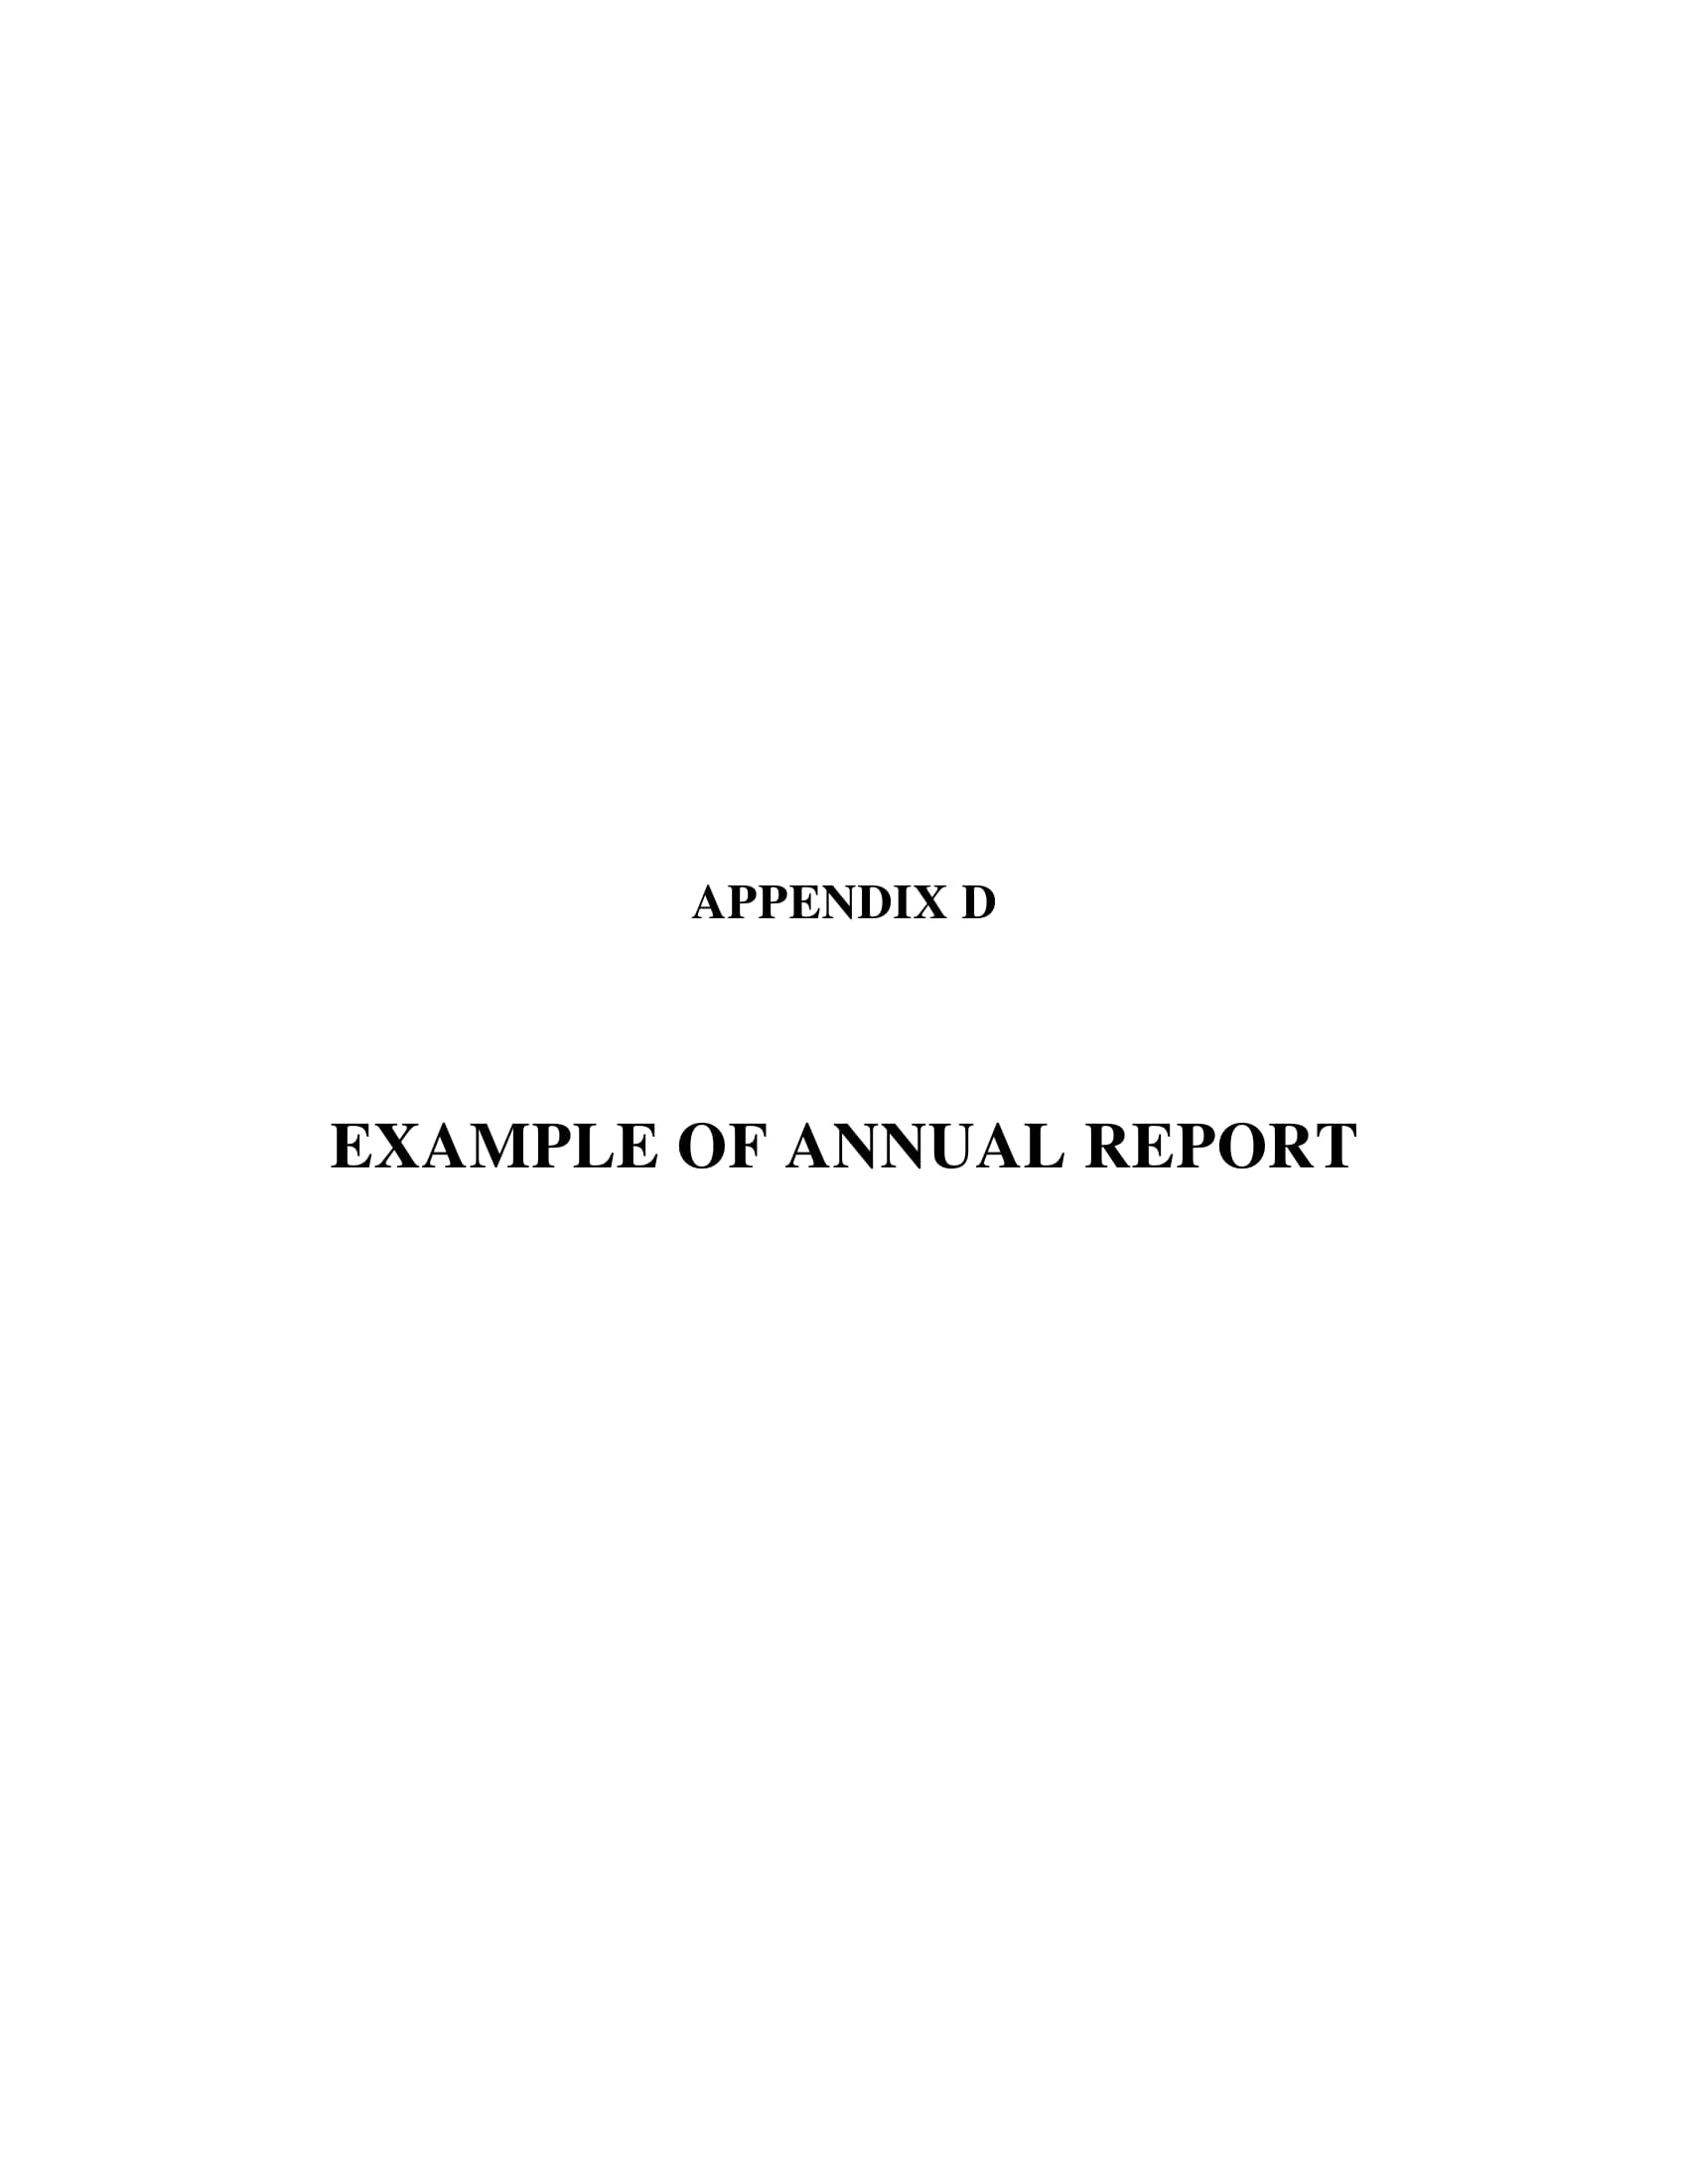 annual business report example 01